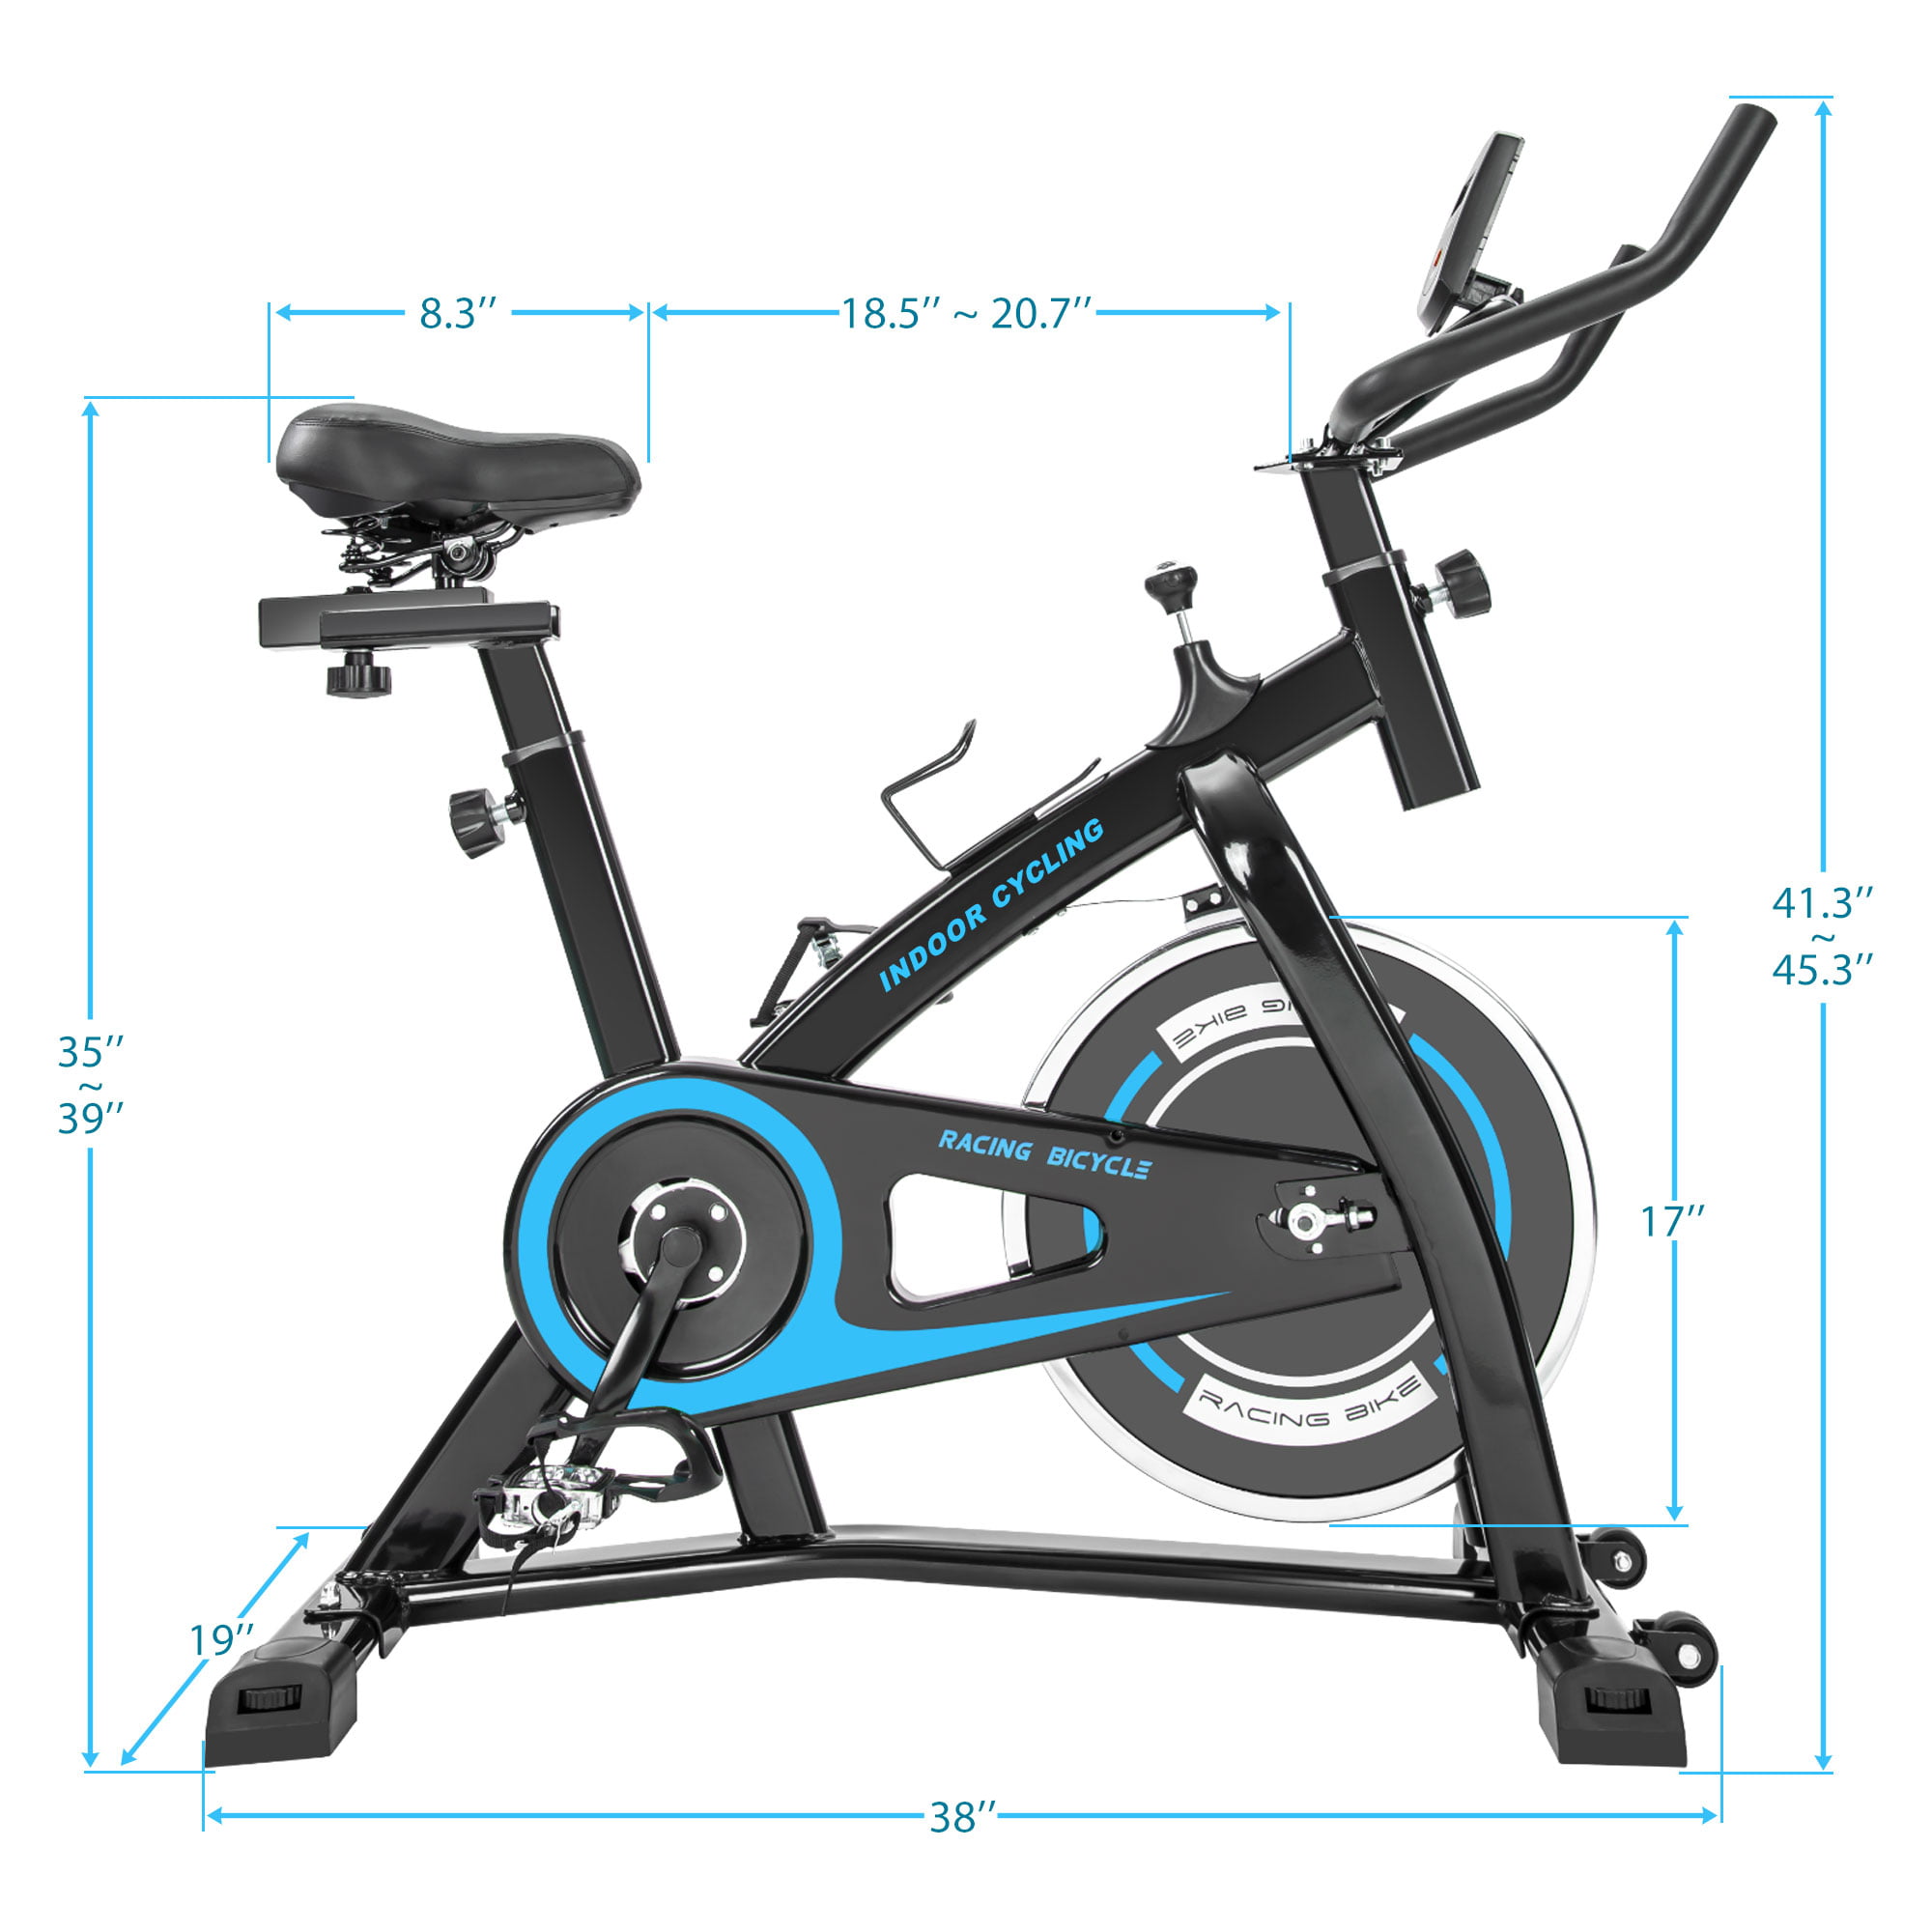 Details about   Exercise Bike Cycling Flywheel Fitness Home Gym Workout LCD Display 2 Model AU 